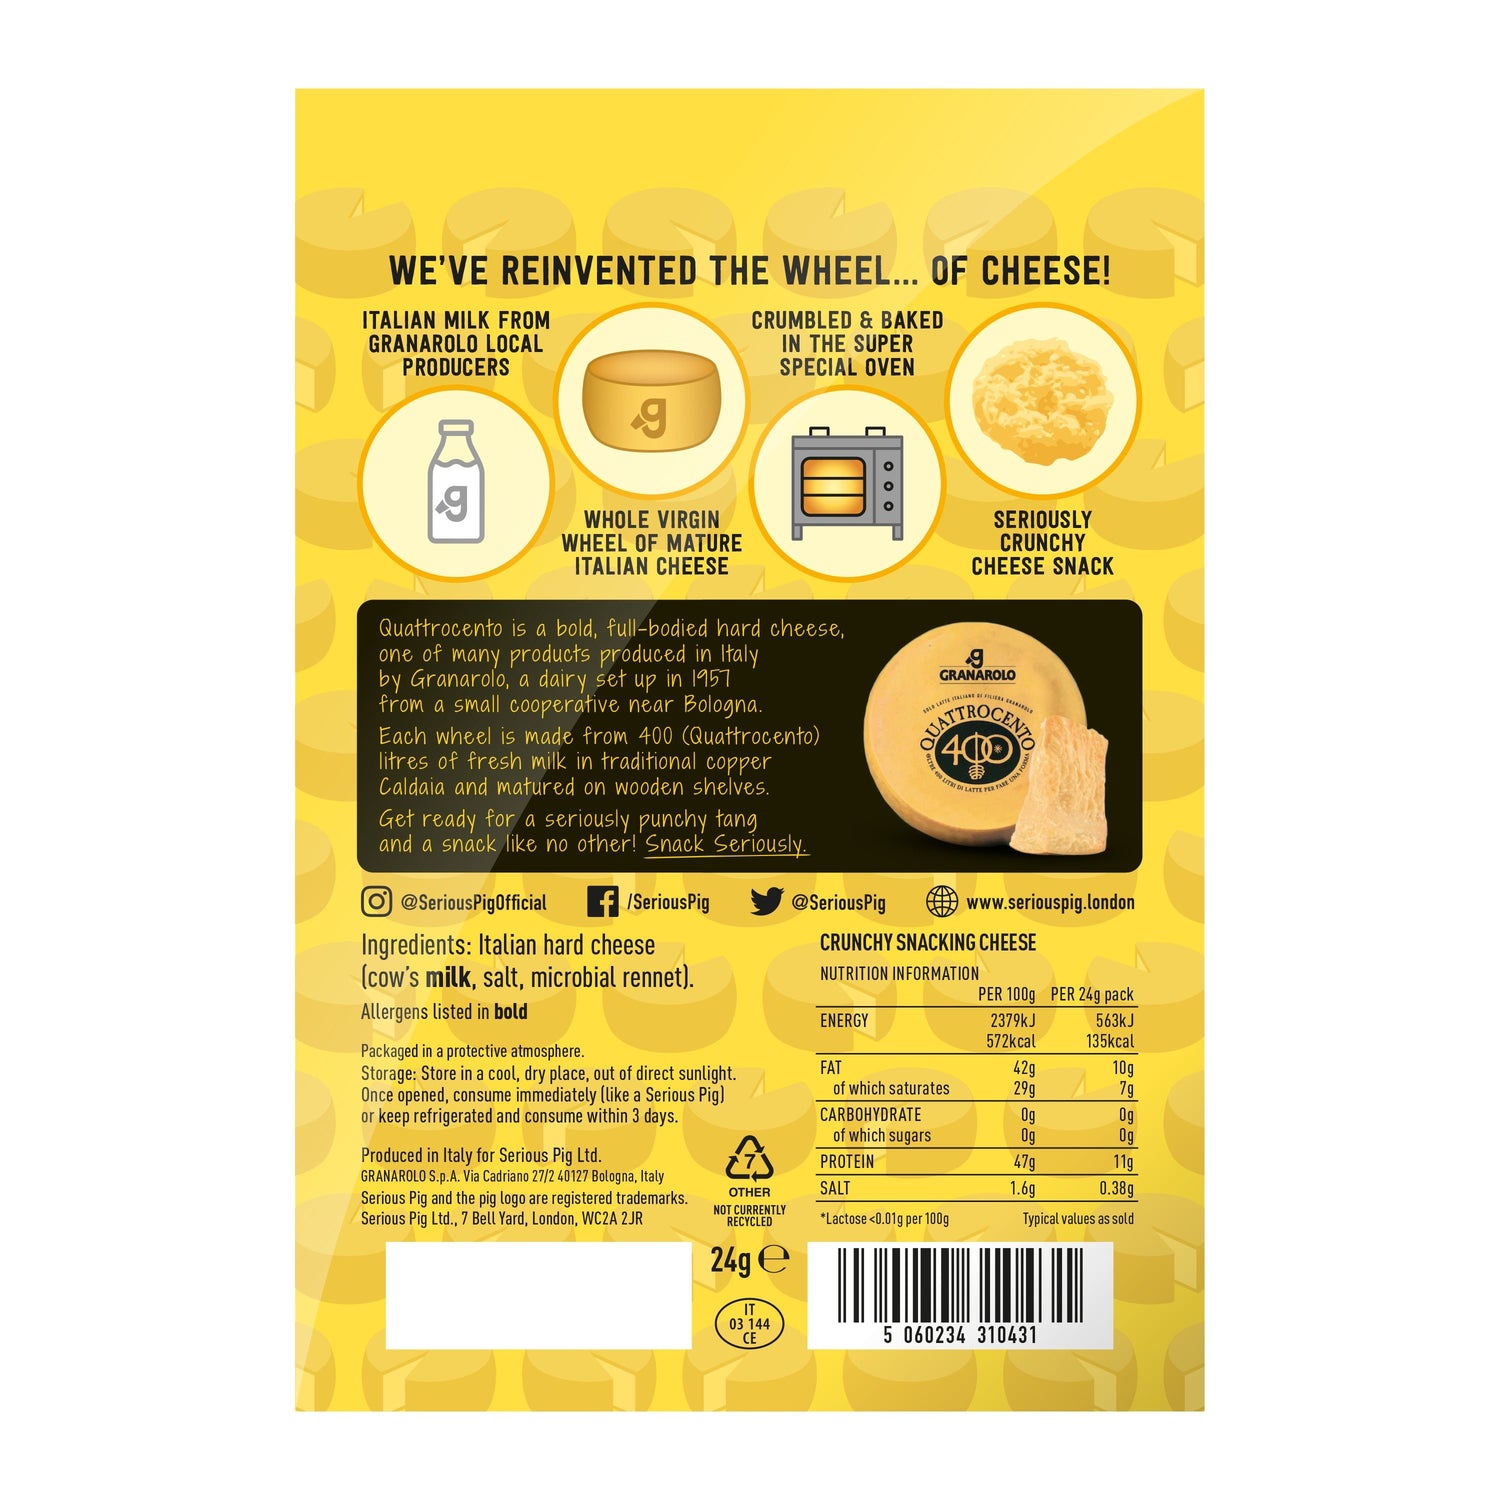 Serious Pig Crunchy Snacking Cheese x 4 flavours - Keto friendly - theskinnyfoodco